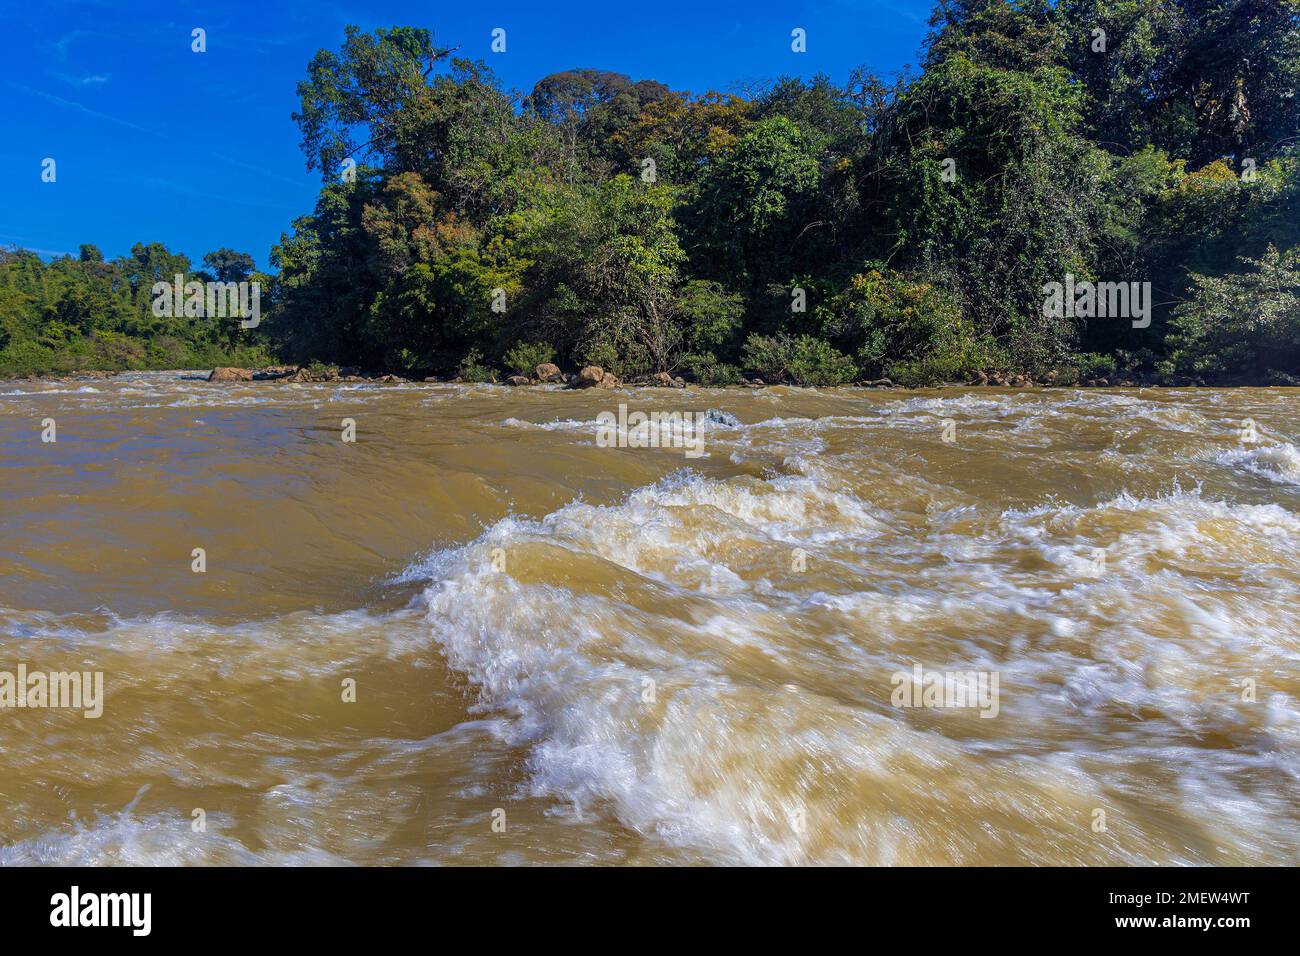 Rapids of the Song Dong Nai River in Cat Tien National Park, Vietnam Stock Photo